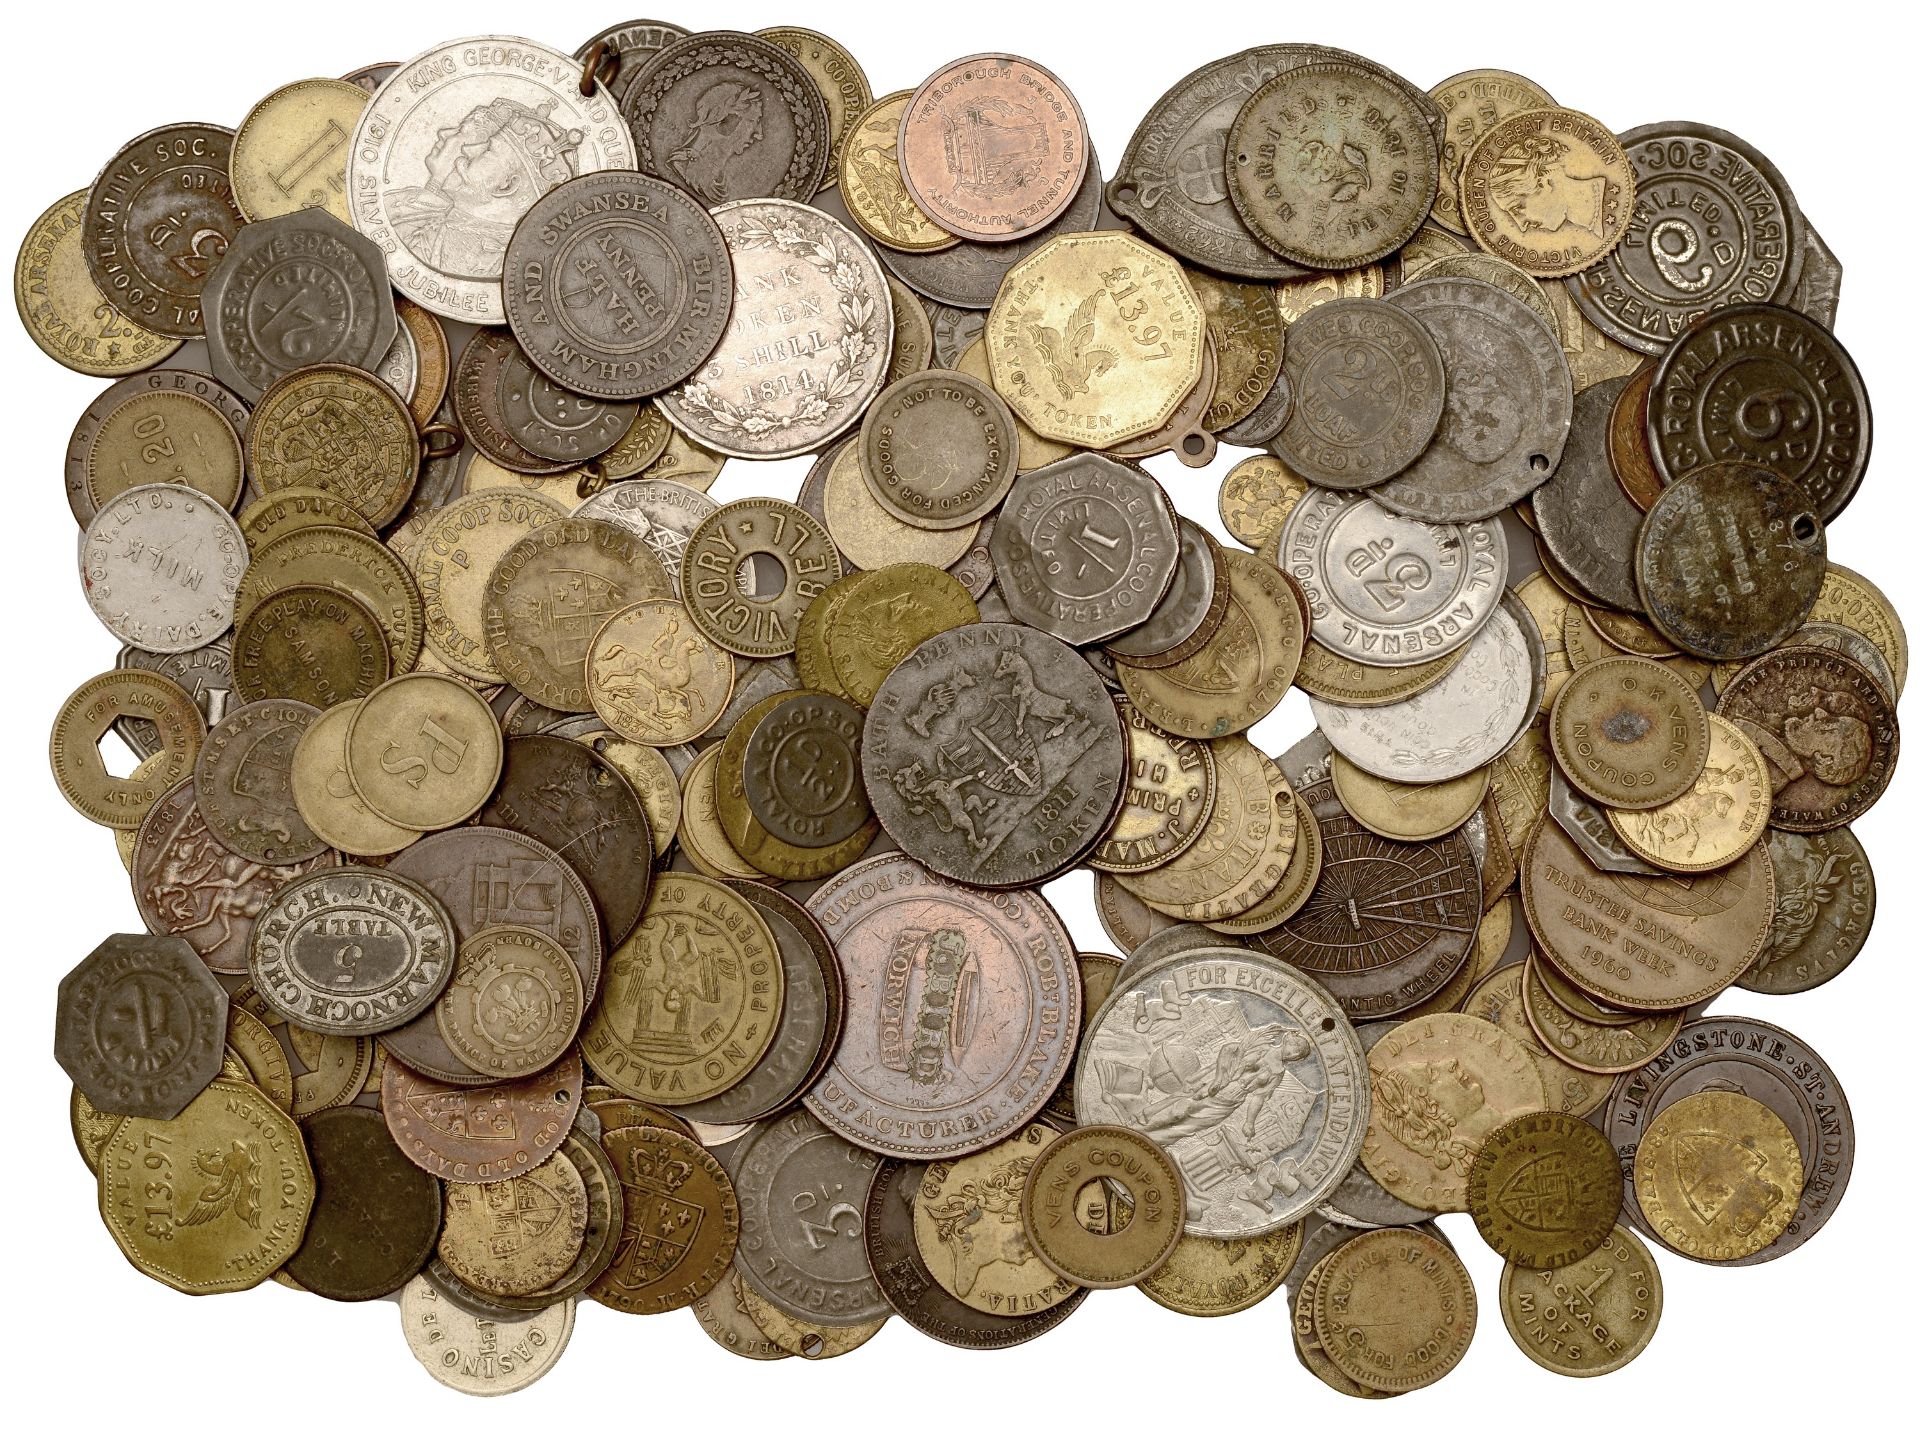 Miscellaneous British and World coins, tokens, checks, medals, etc (c. 200), mostly base met...